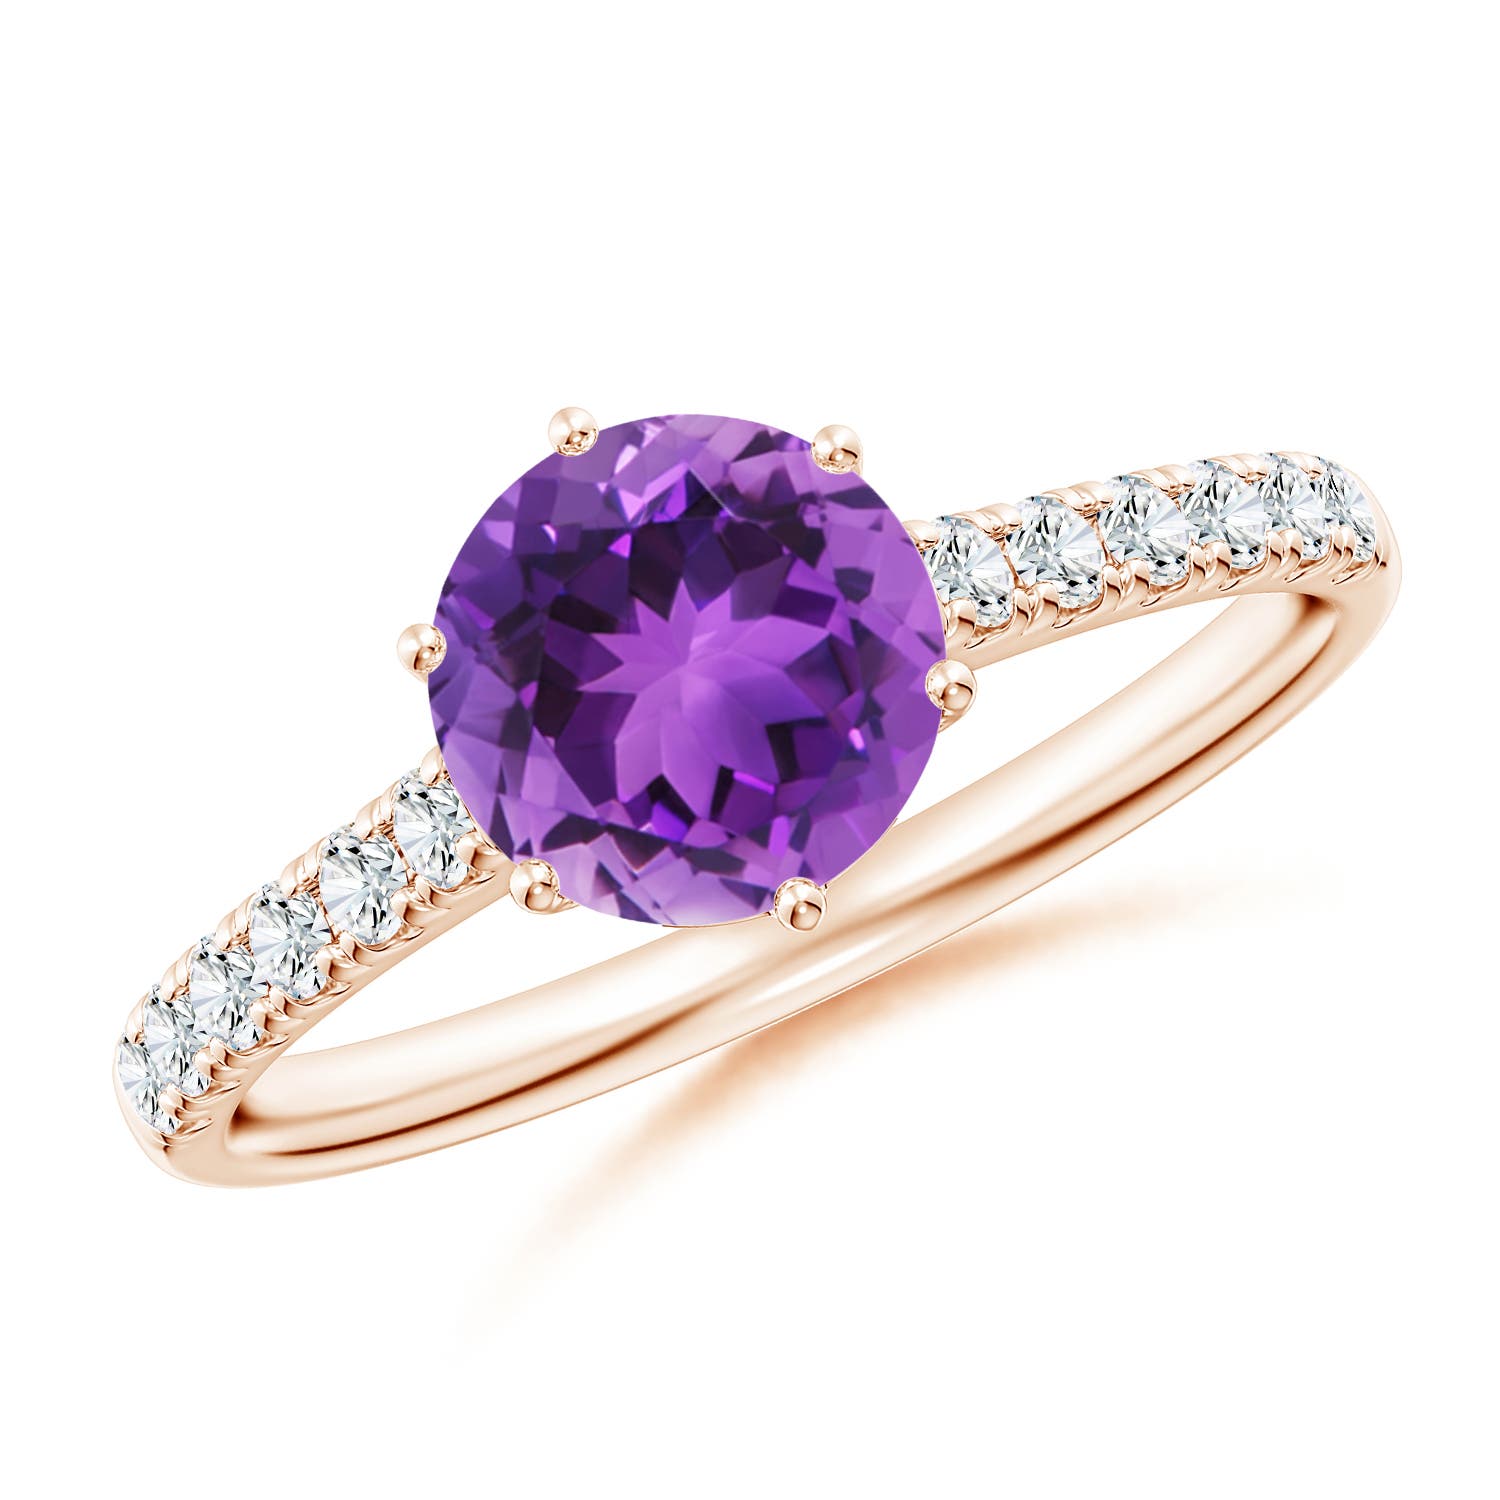 AAA - Amethyst / 1.4 CT / 14 KT Rose Gold